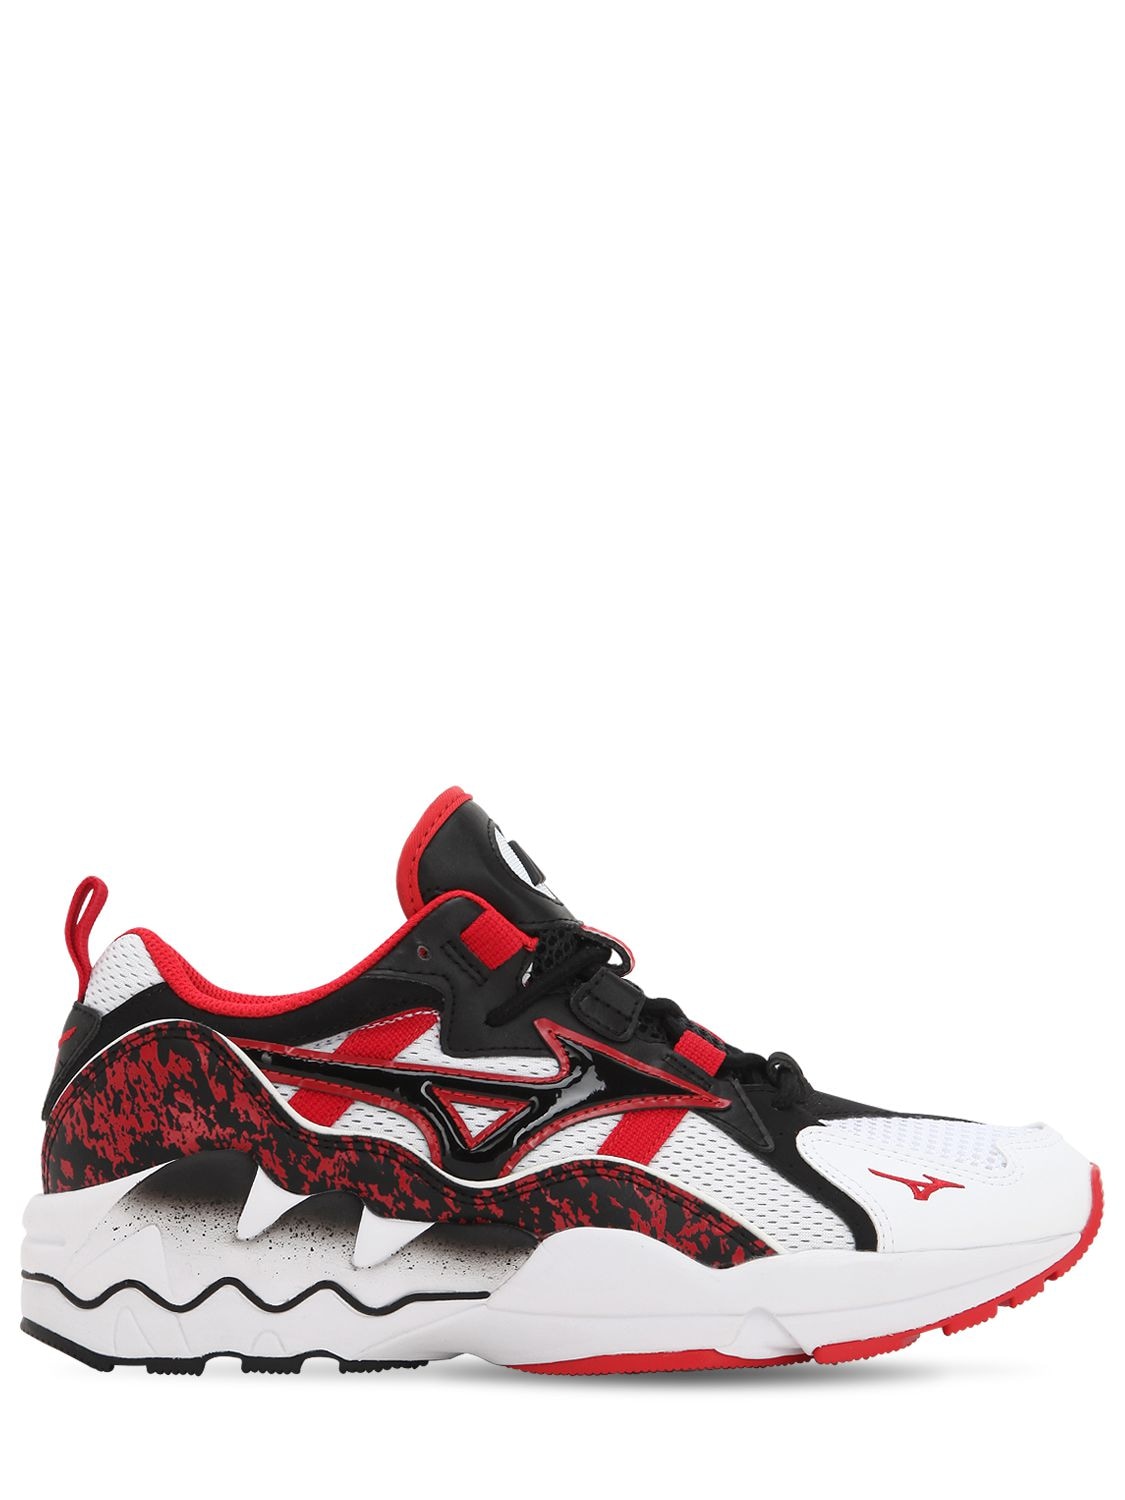 Mizuno Wave Rider 1 Sneakers In Red